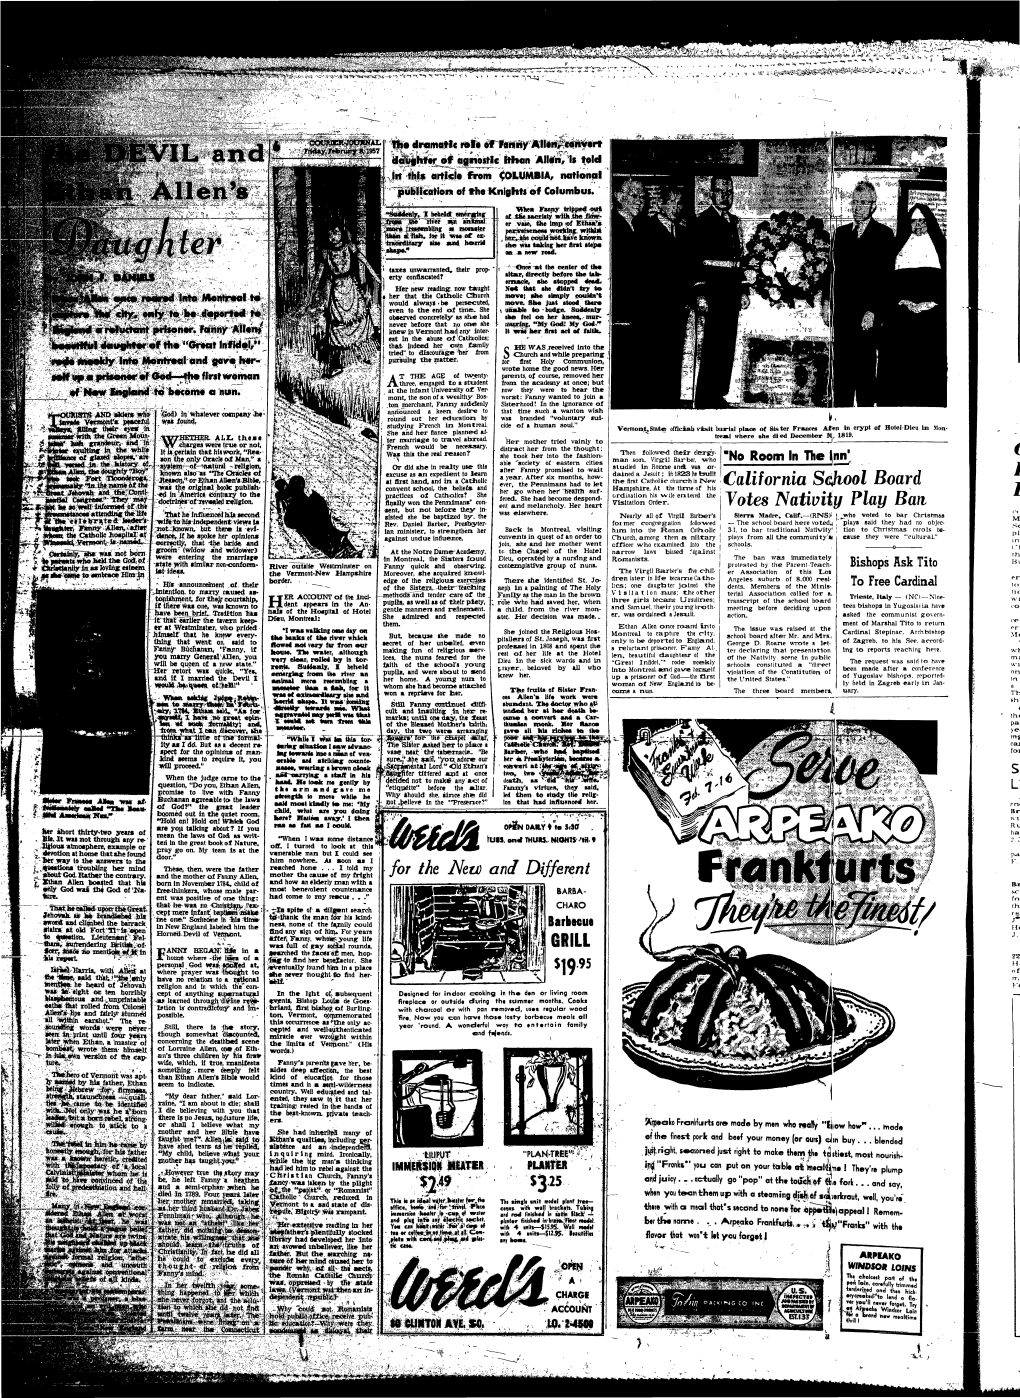 Catholic-Courier-Journal-1957